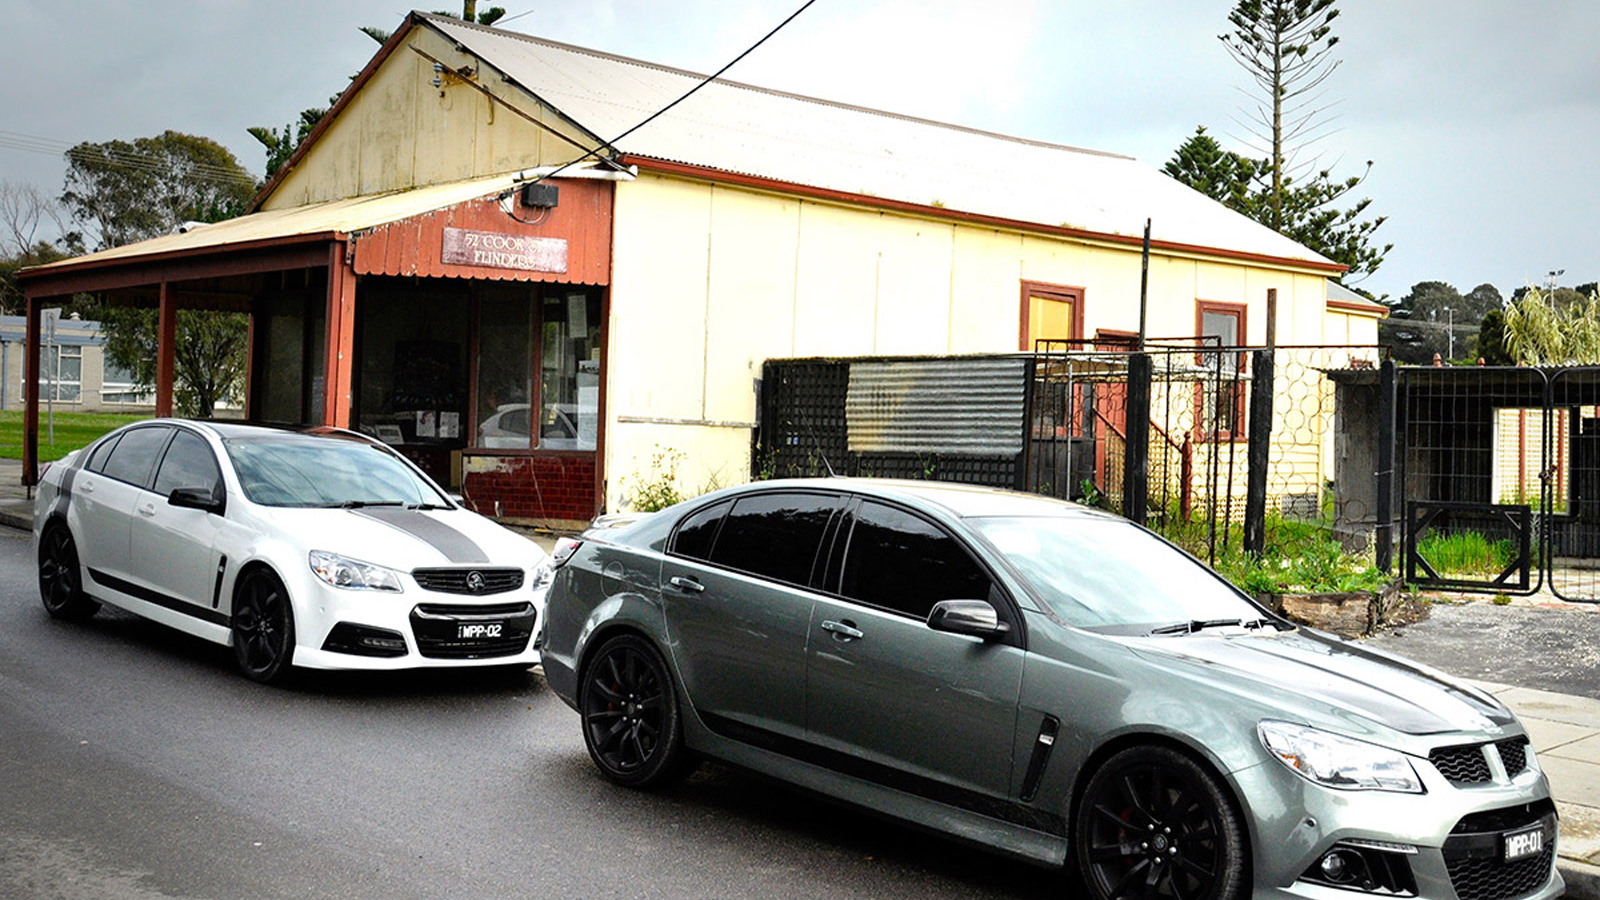 VF Holden Commodore SS-V and HSV Gen-F fitted with Walkinshaw Performance supercharger upgrade